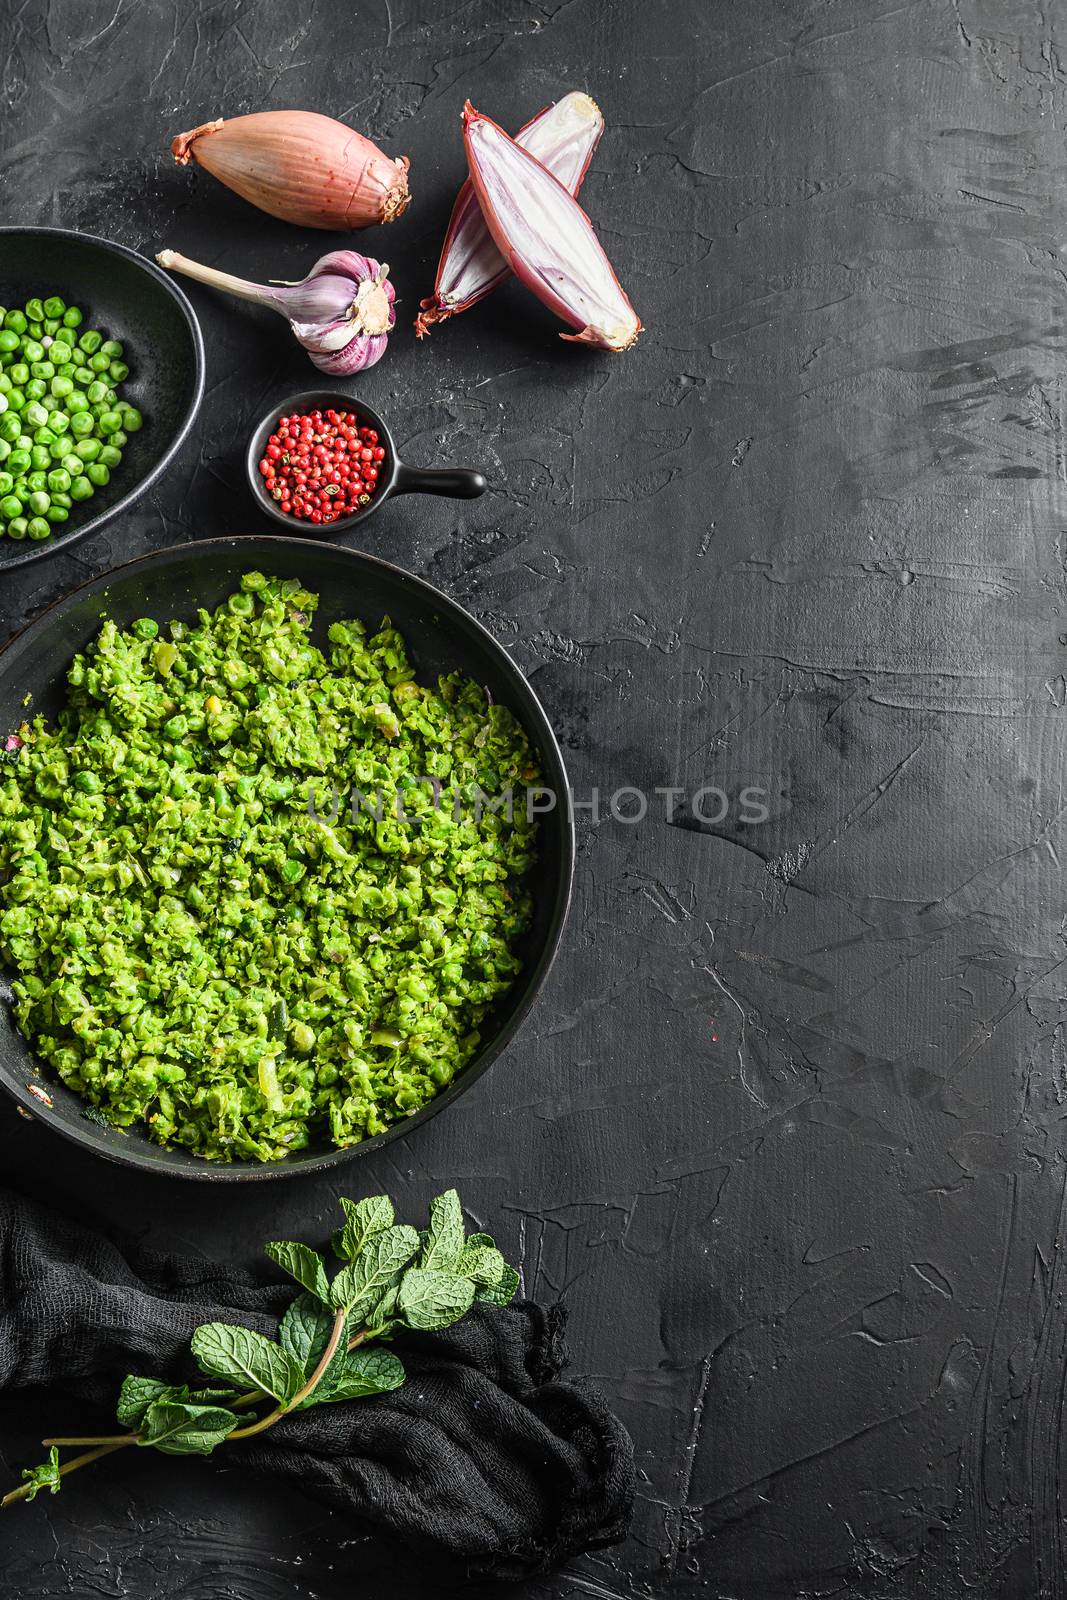 mushy peas gluten free cooked frying pan and peas in bowl with mint shallot pepper and salt s black stone surface organic keto food top view space for text vertical concept by Ilianesolenyi